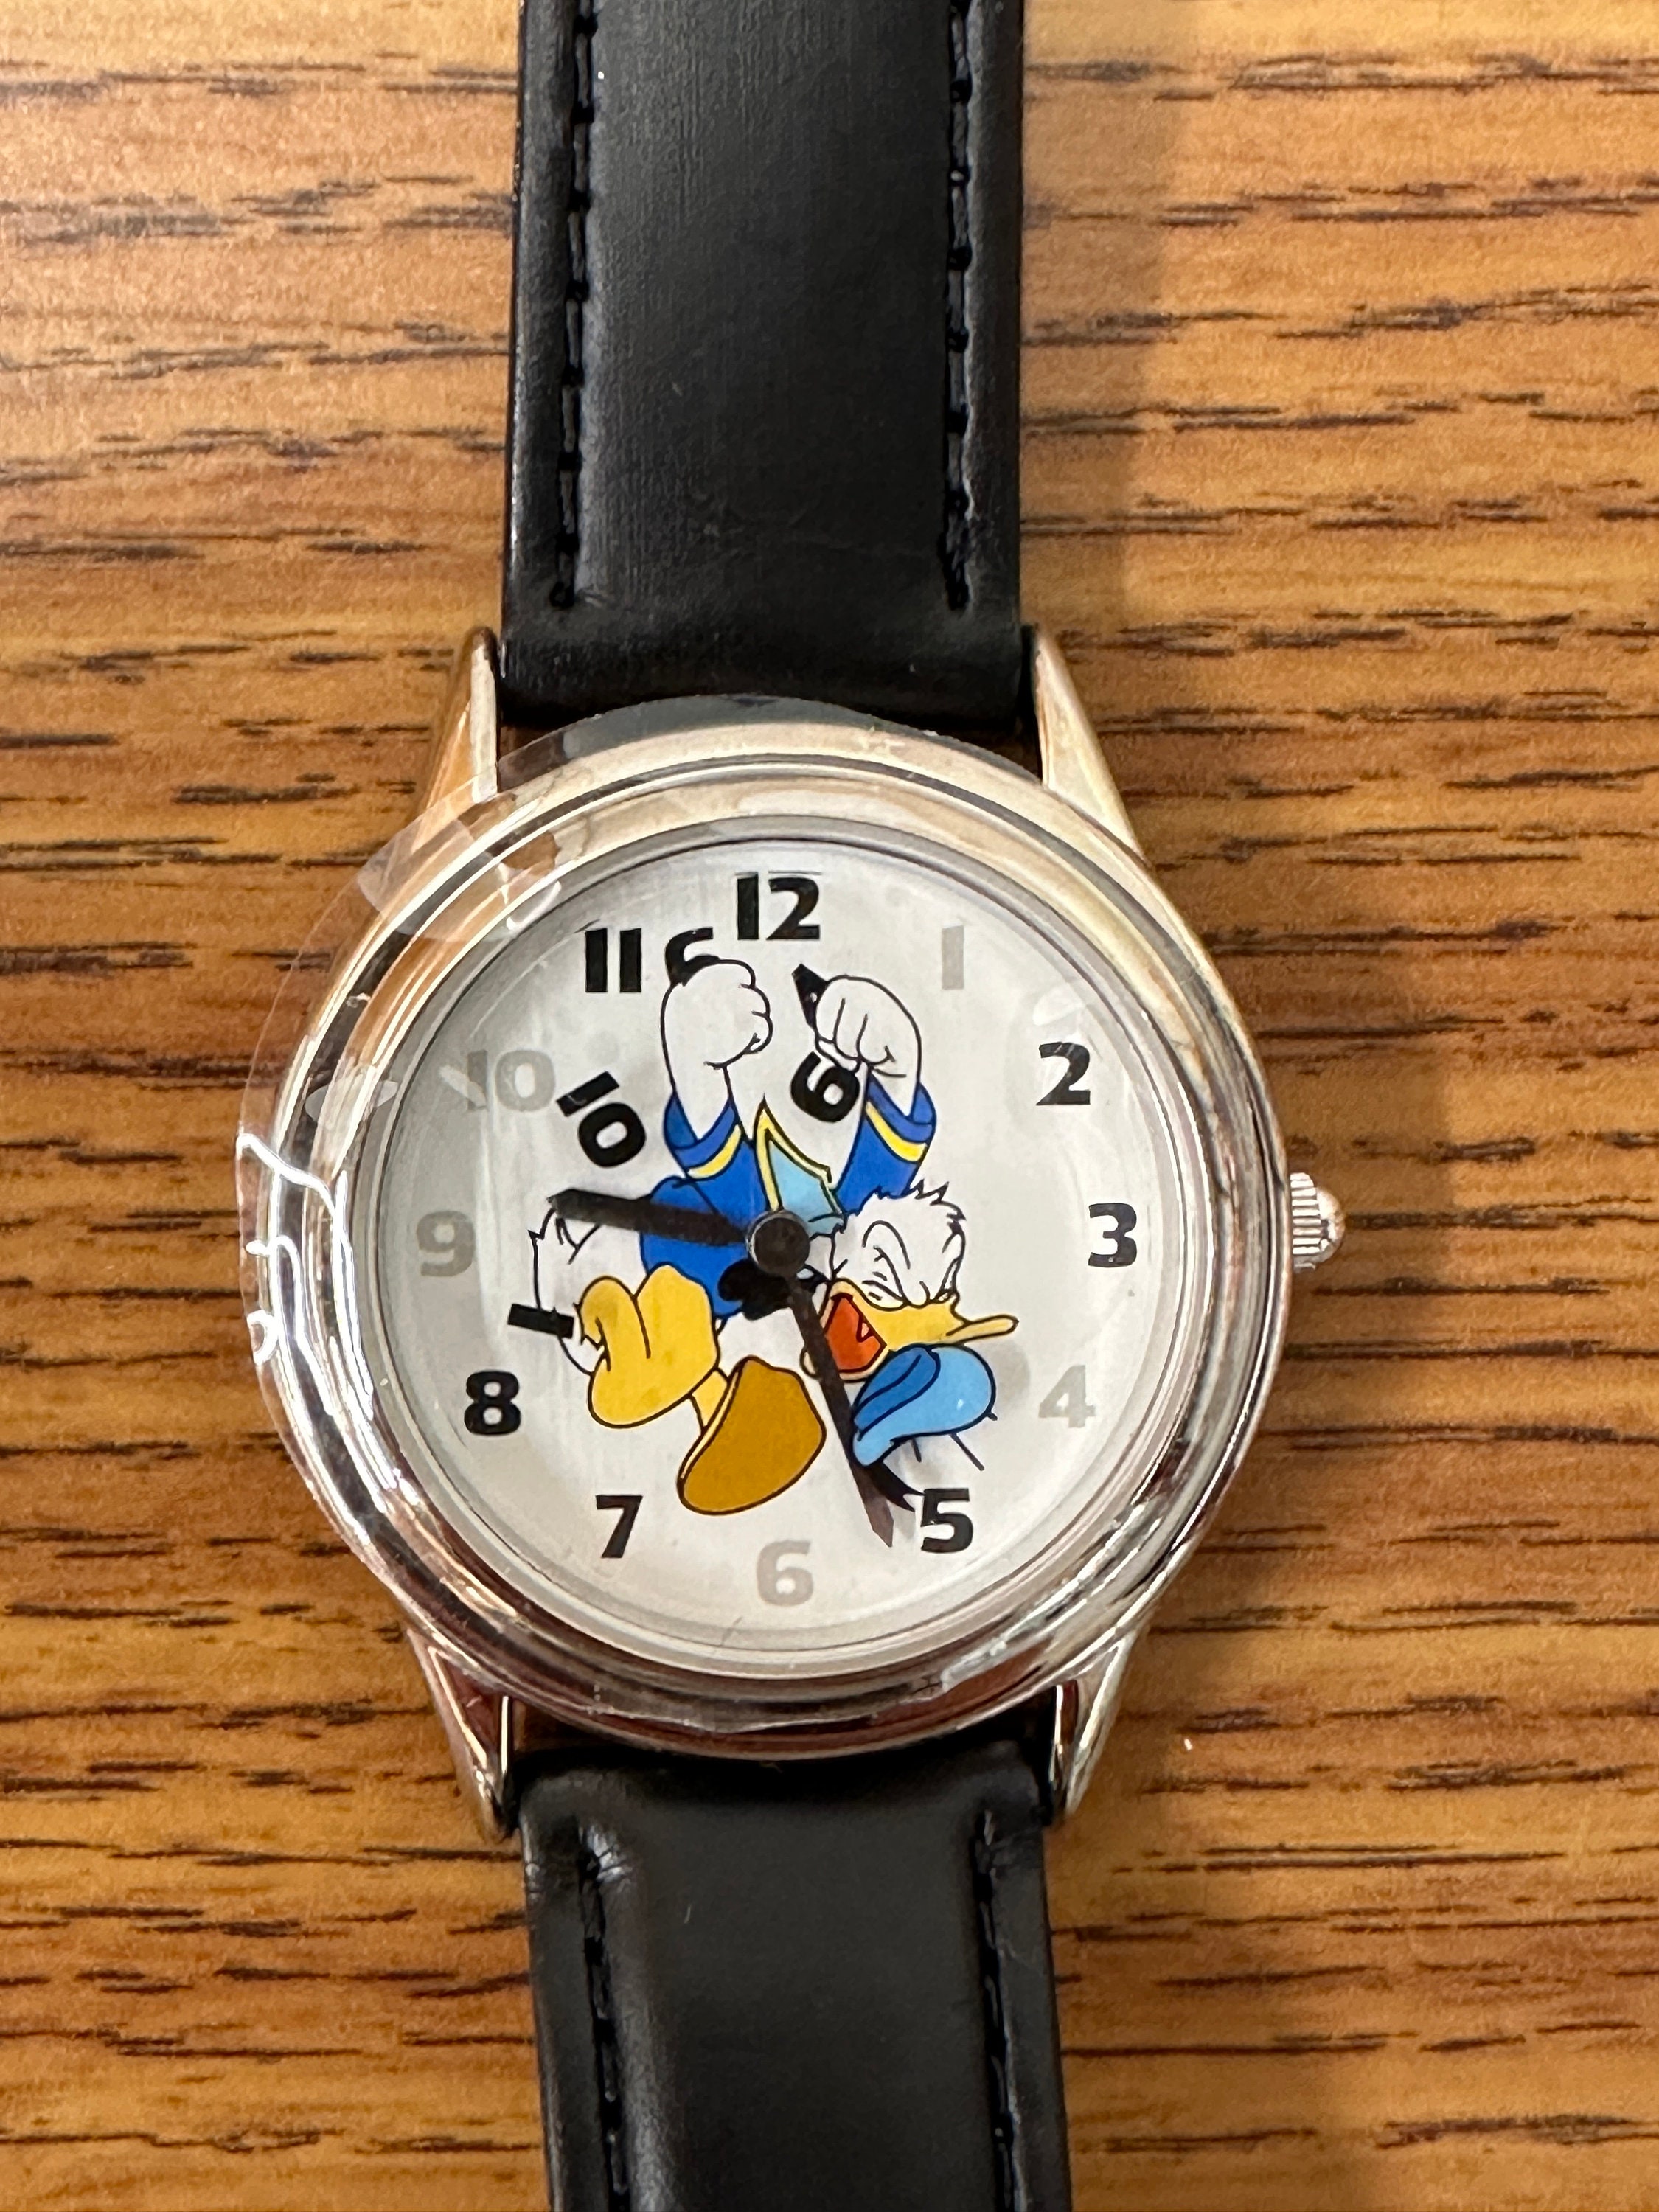 Disney x Fossil Special Edition Classic Disney Mickey Mouse Watch - SE1111  - Fossil